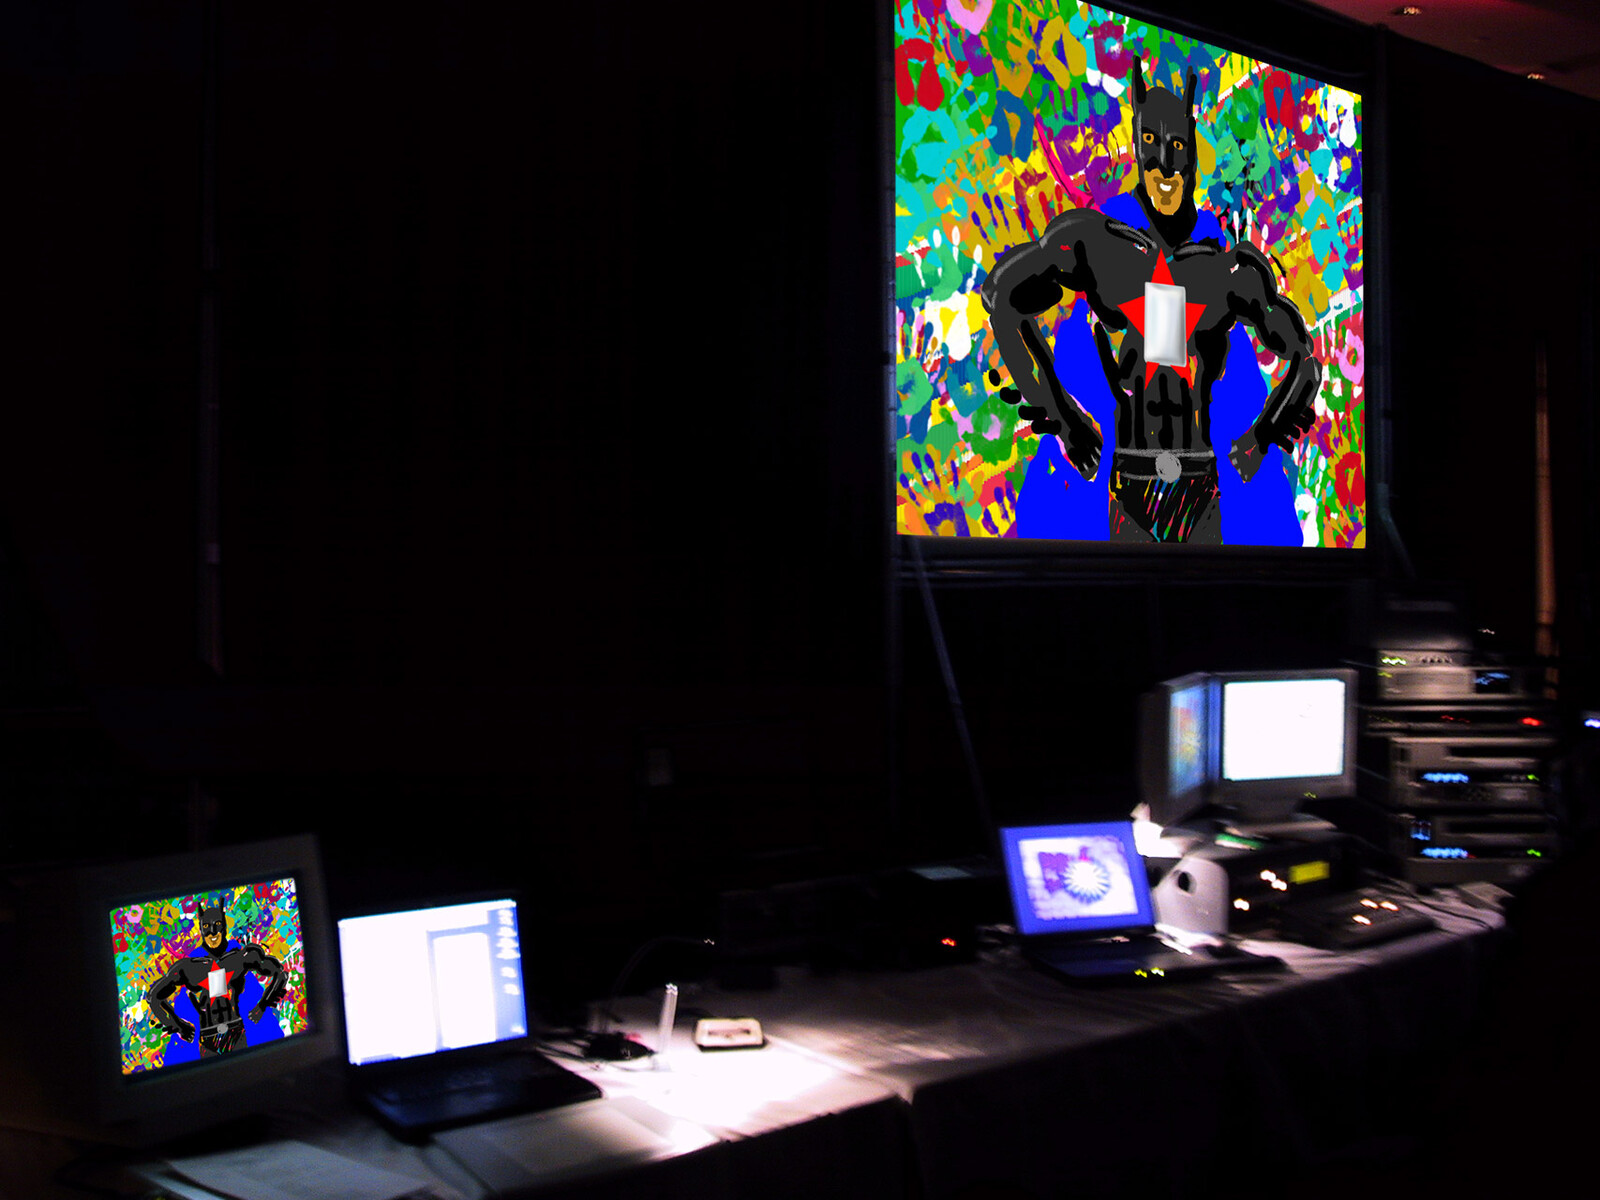 Cadbury/Adams corporate conference in Don Mill, Toronto. Using a laptop and a wacom tablet I drew live.